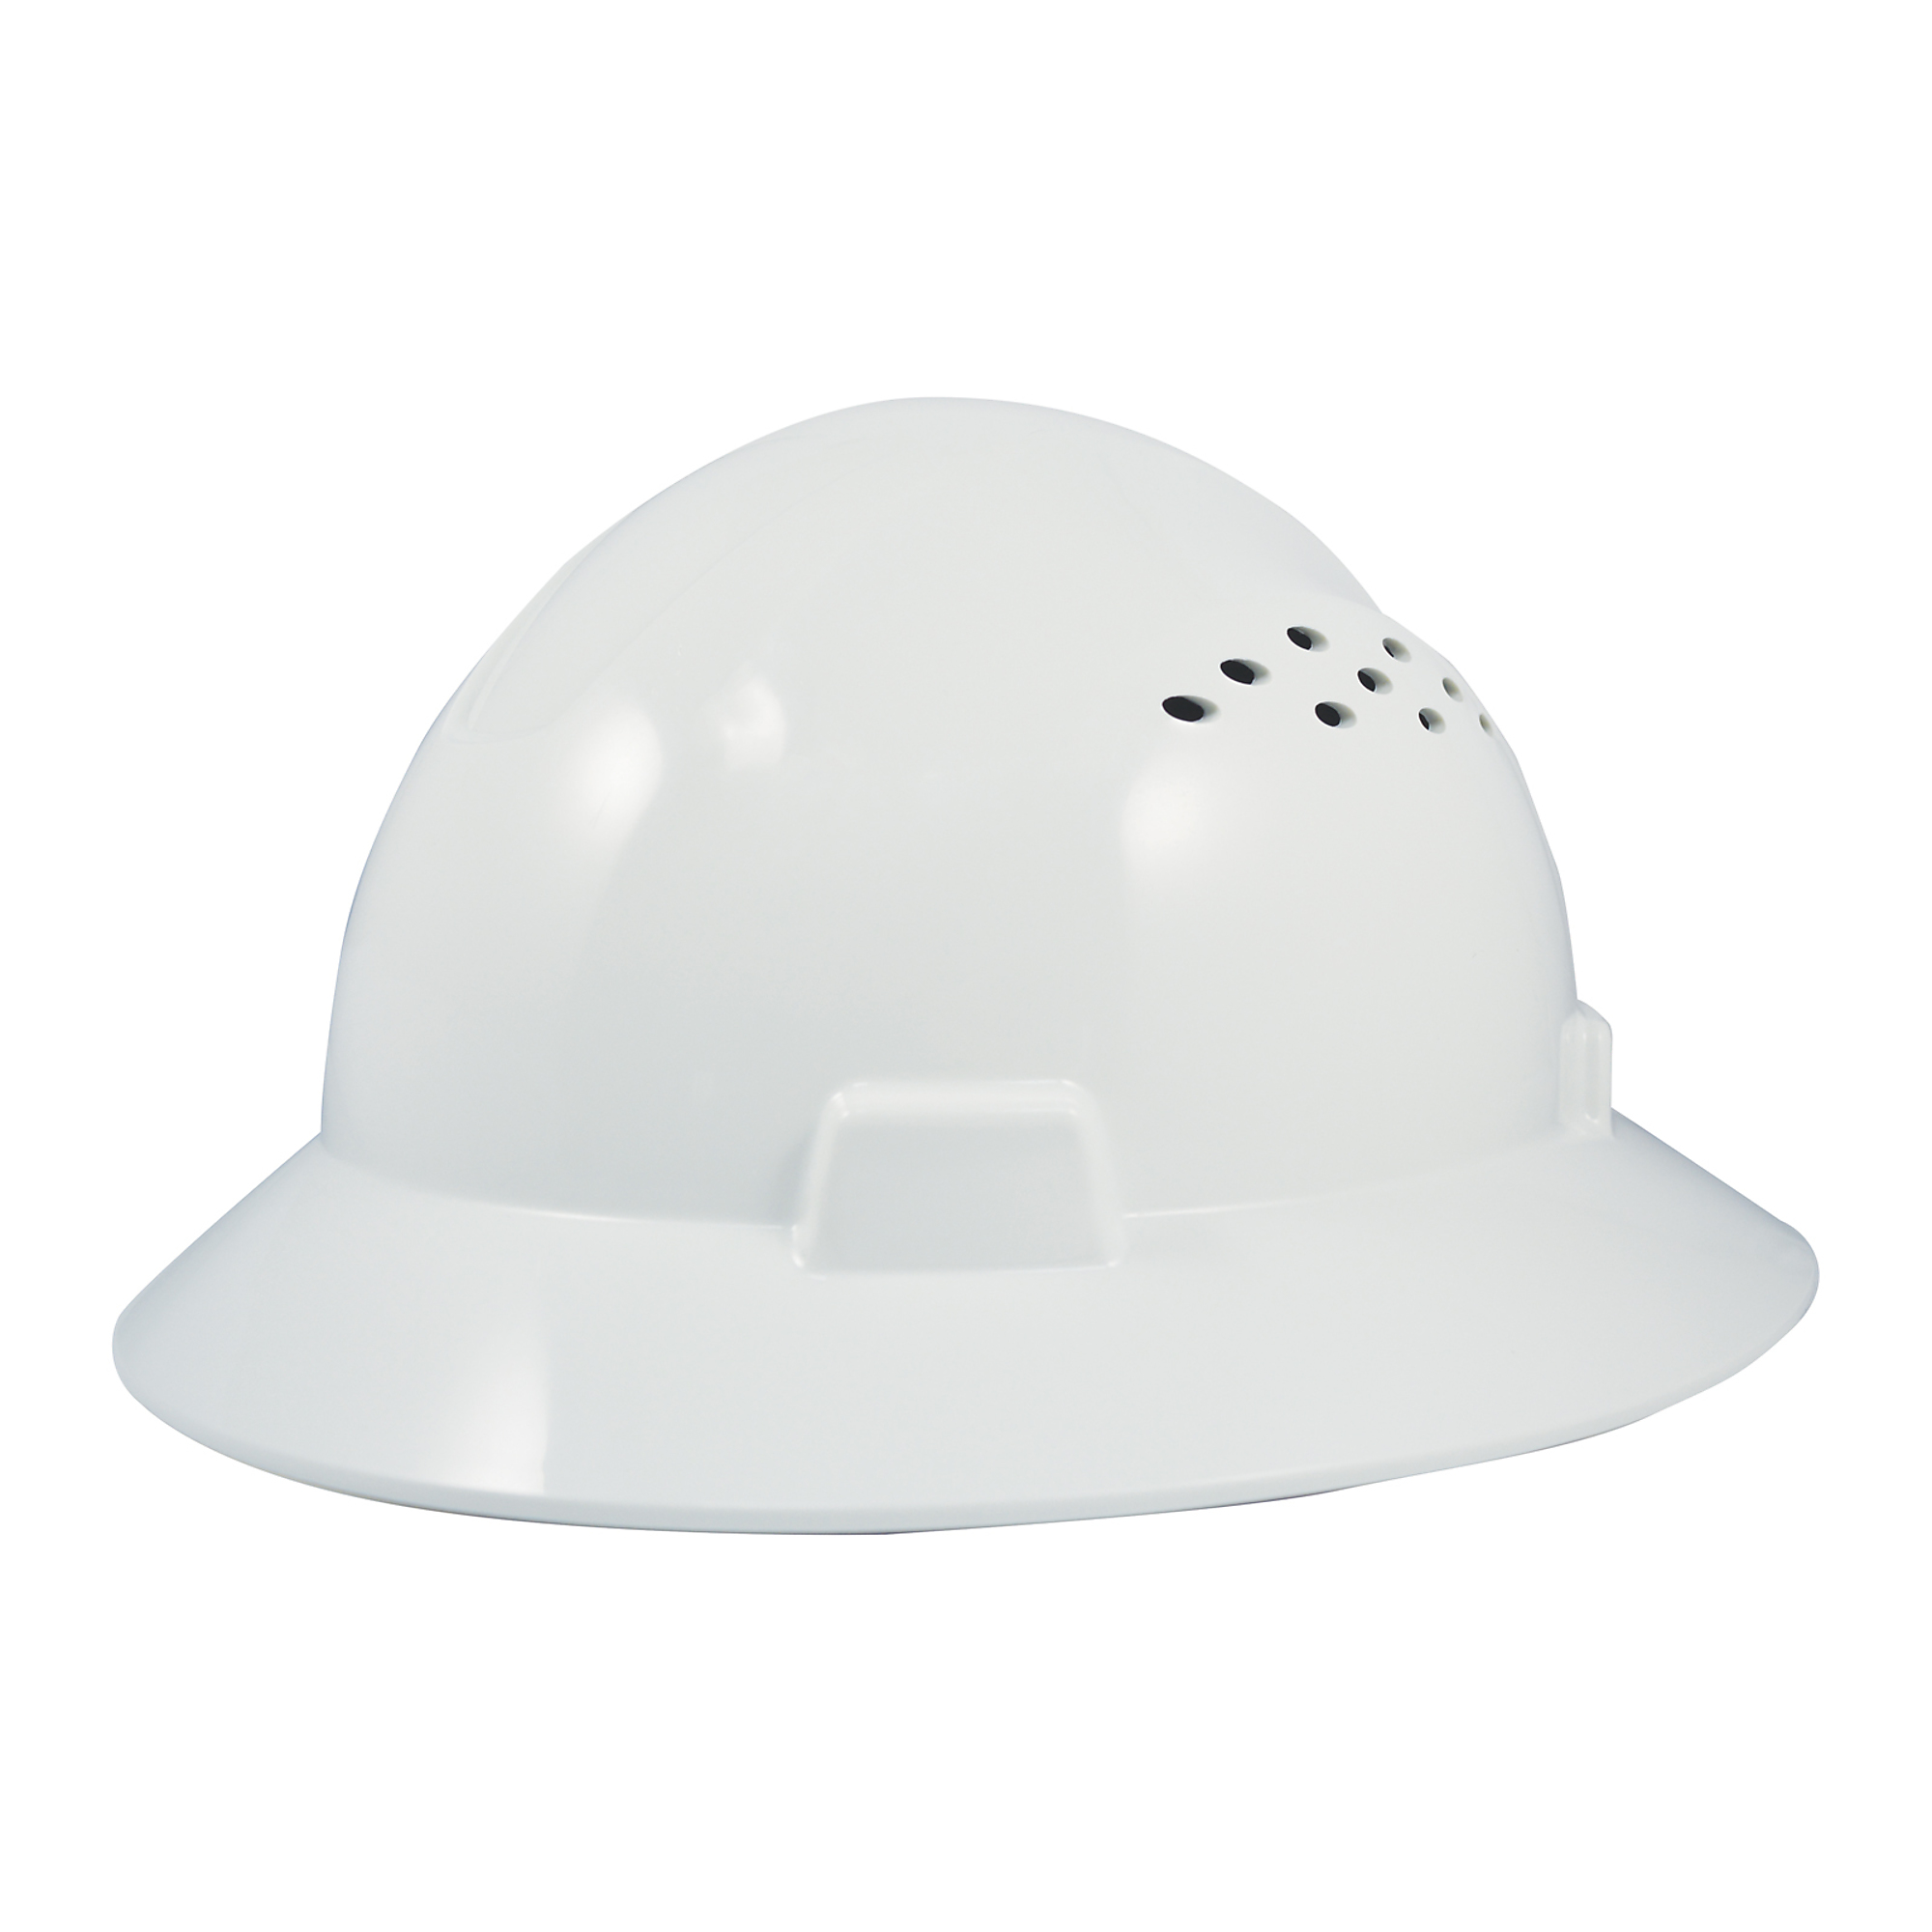 General Electric, Safety Helmet- Full Brim Vented- White, Hard Hat Style Full Brim, Hat Size One Size, Color White, Model GH328W